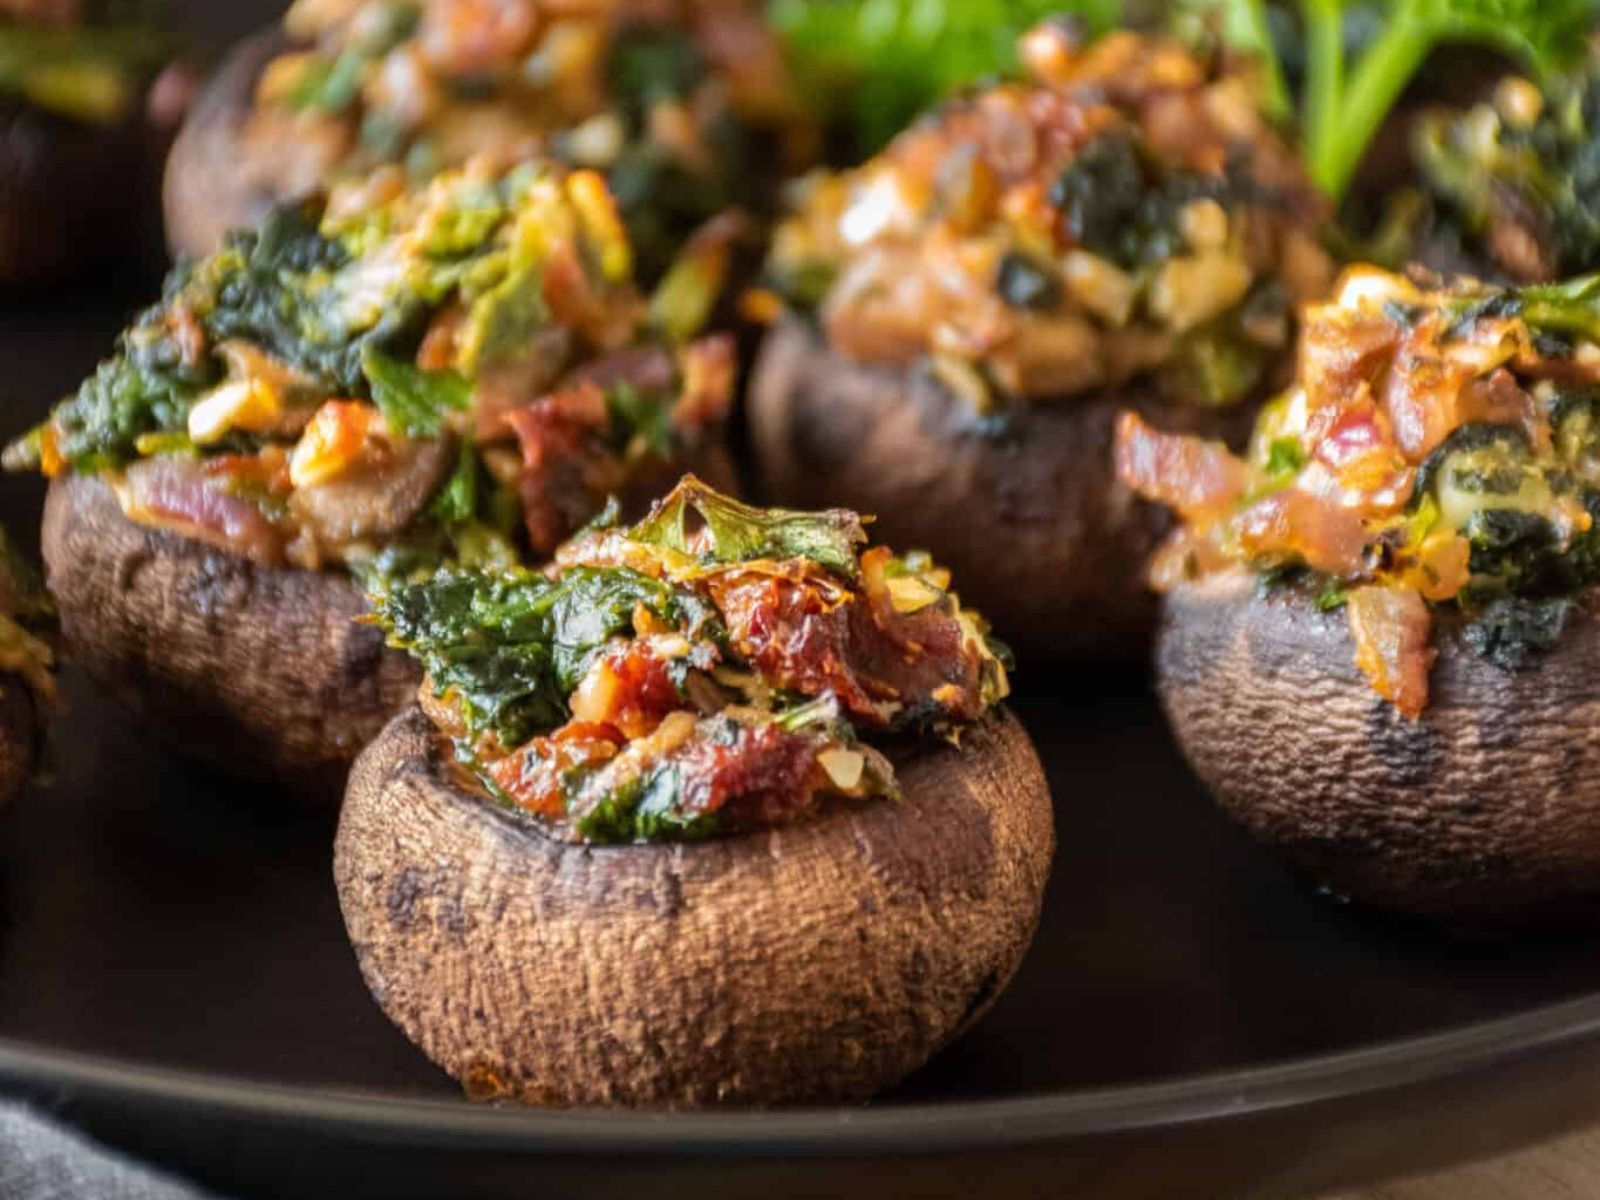 gluten-free appetizers: spinach and feta stuffed mushrooms